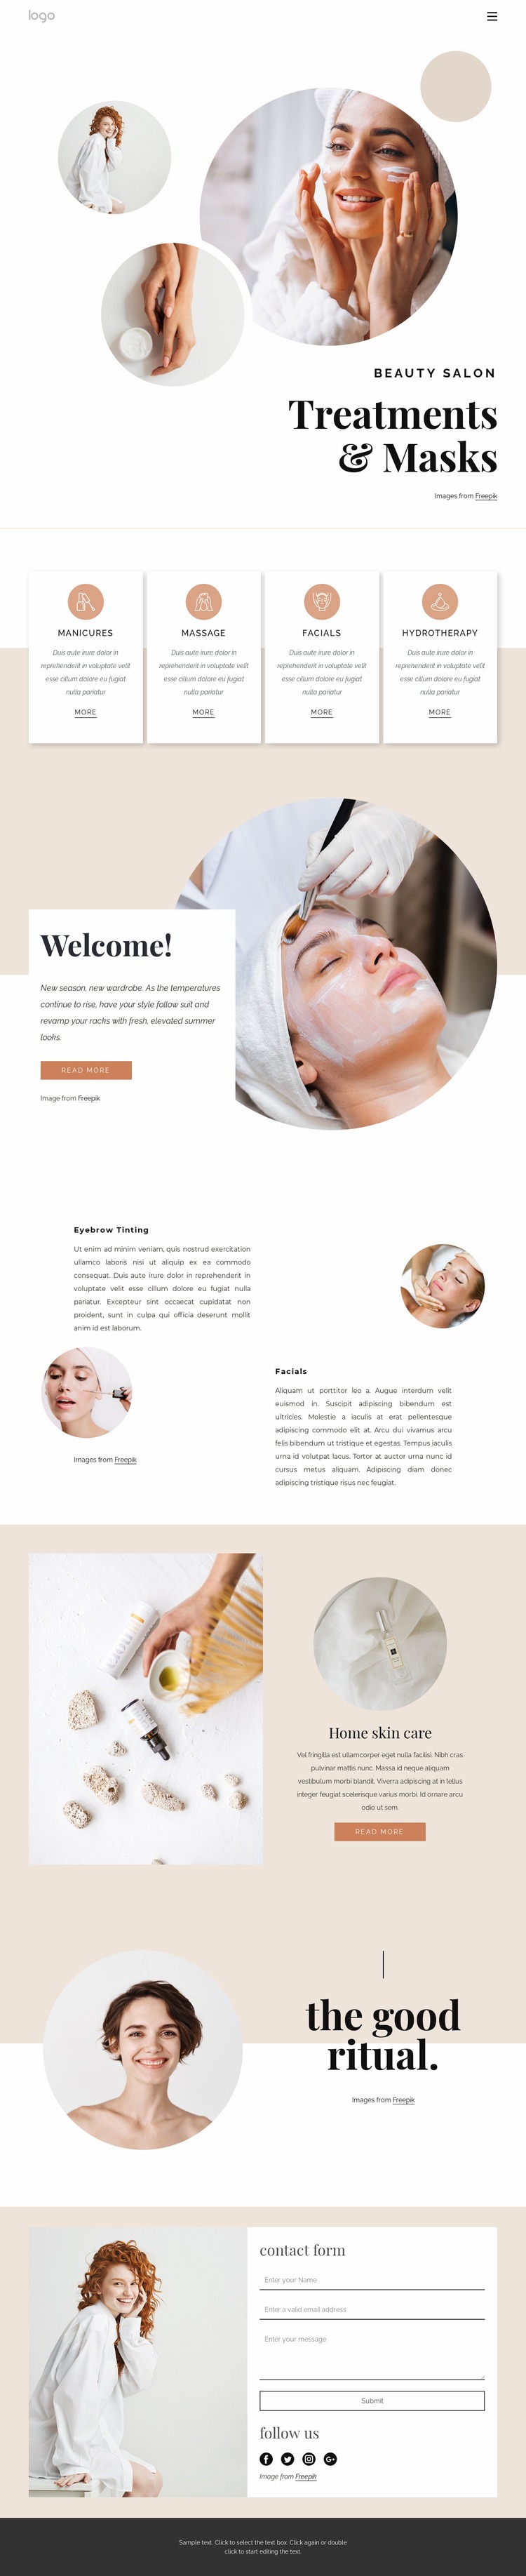 Body treatments and massages Web Page Design